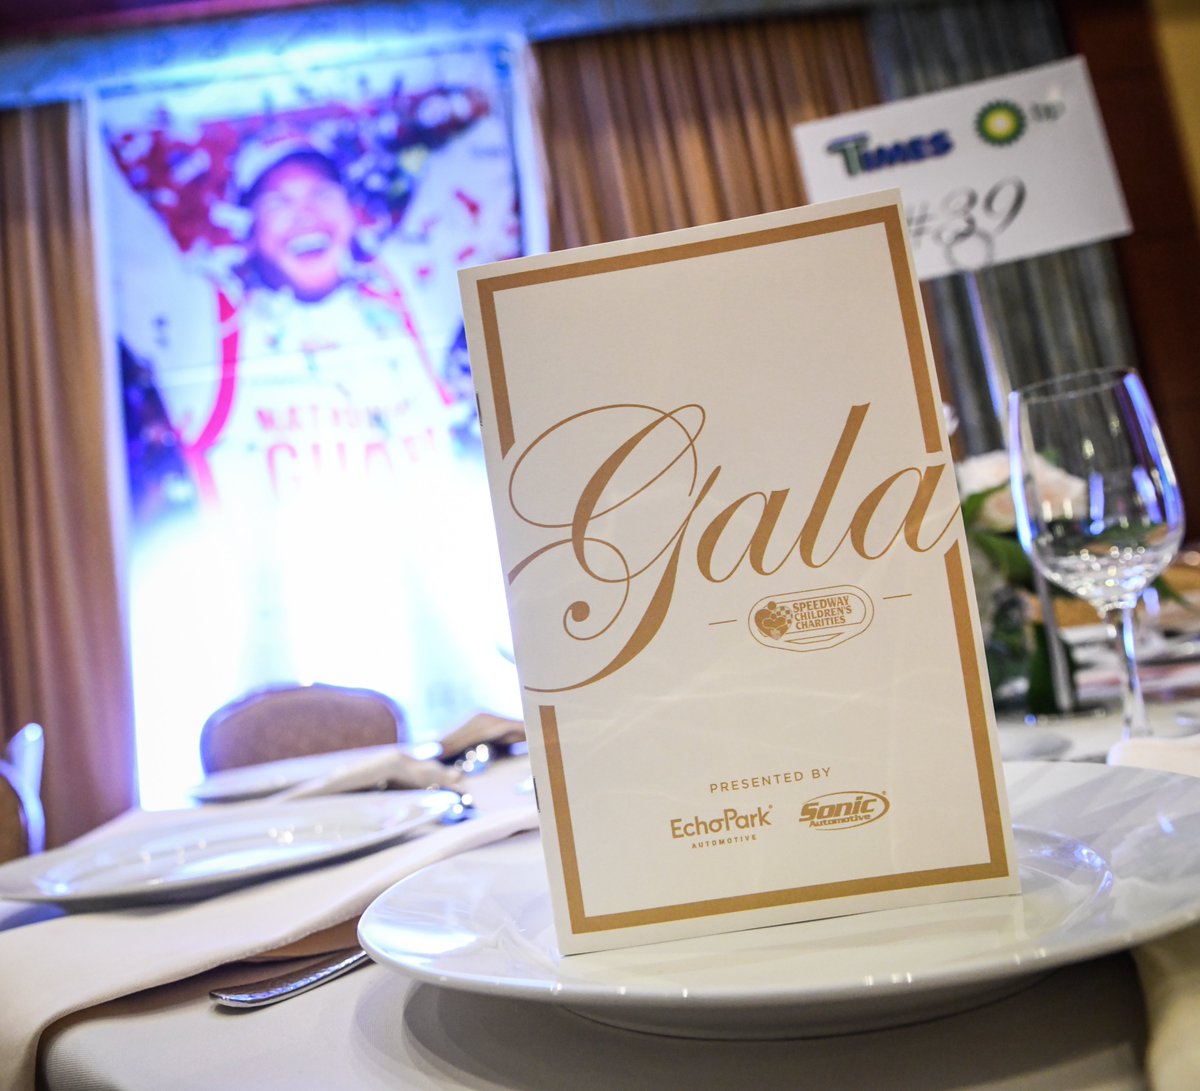 What a night to remember! On this #ThrowbackThursday we are reminiscing about the 41st annual Speedway Children’s Gala. On this night, our generous supporters helped us raise over $1.24 million, breaking previous fundraising efforts! ❤️ #kidswin // #kidswinclt